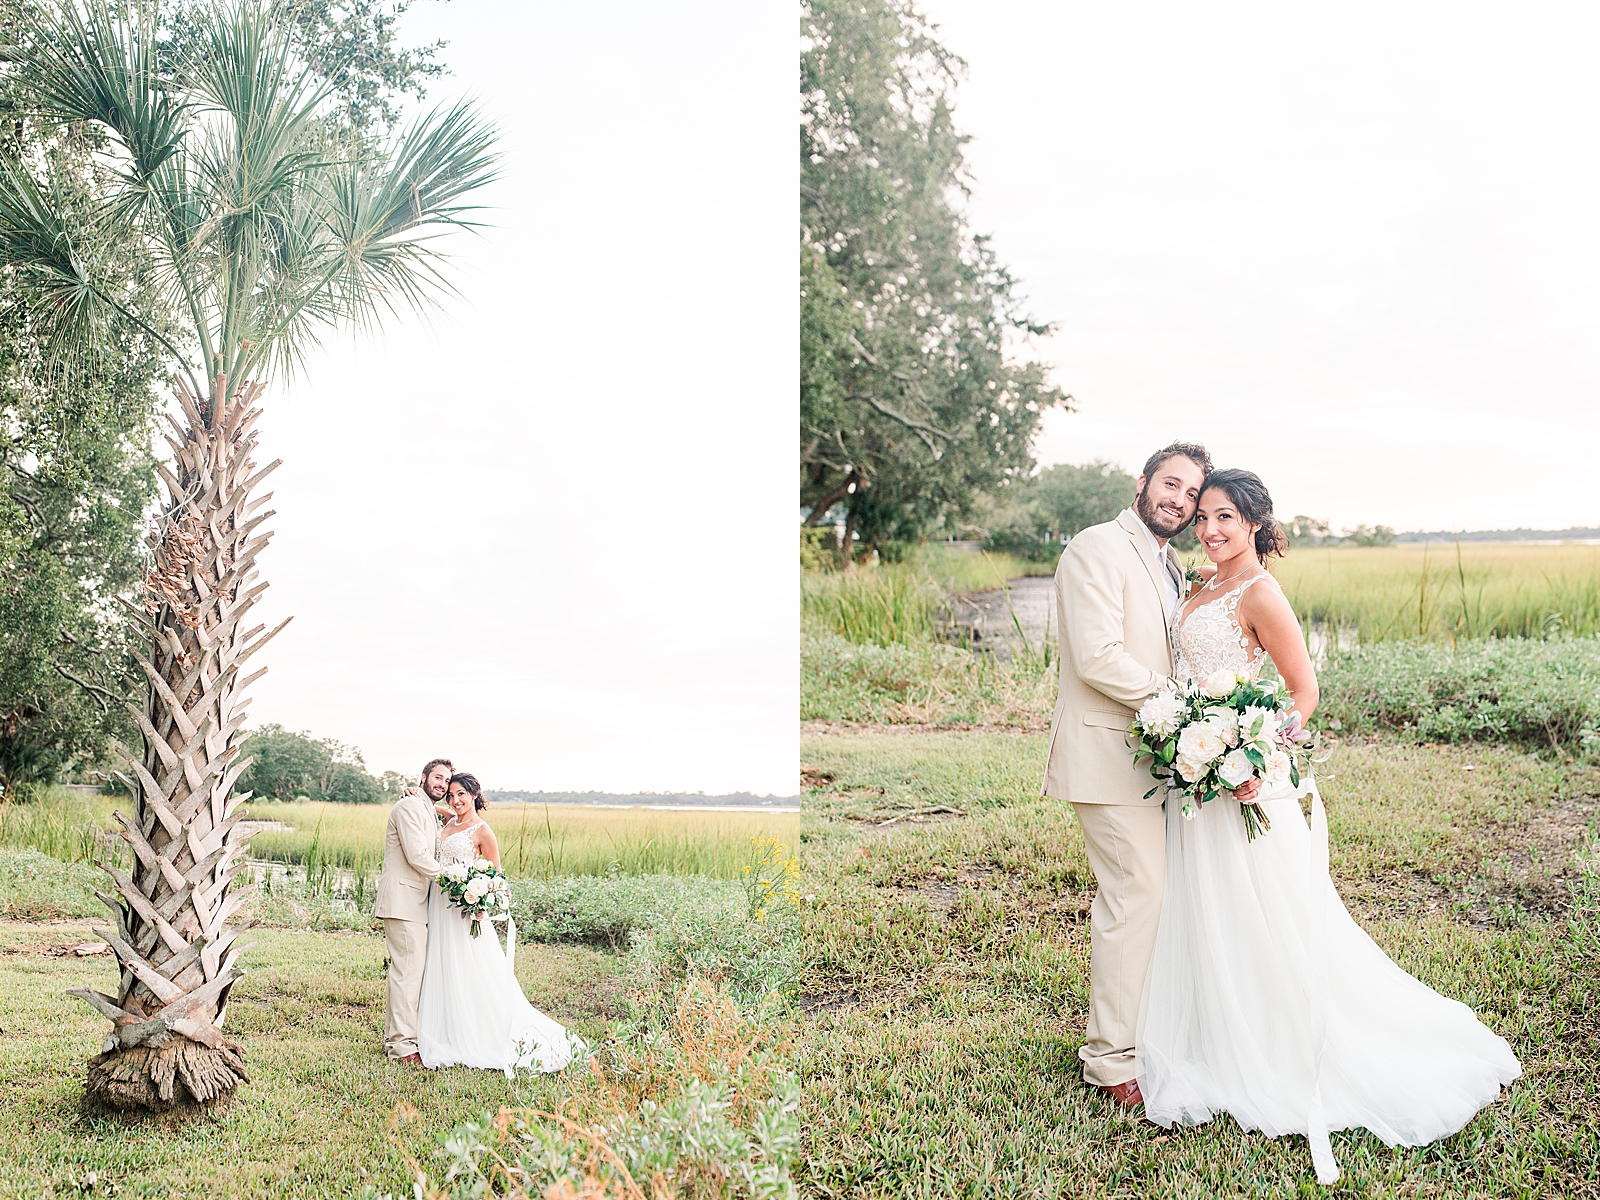 Charleston Wedding at Lowndes Grove Bride and Groom smiling at camera by palm tree Photos